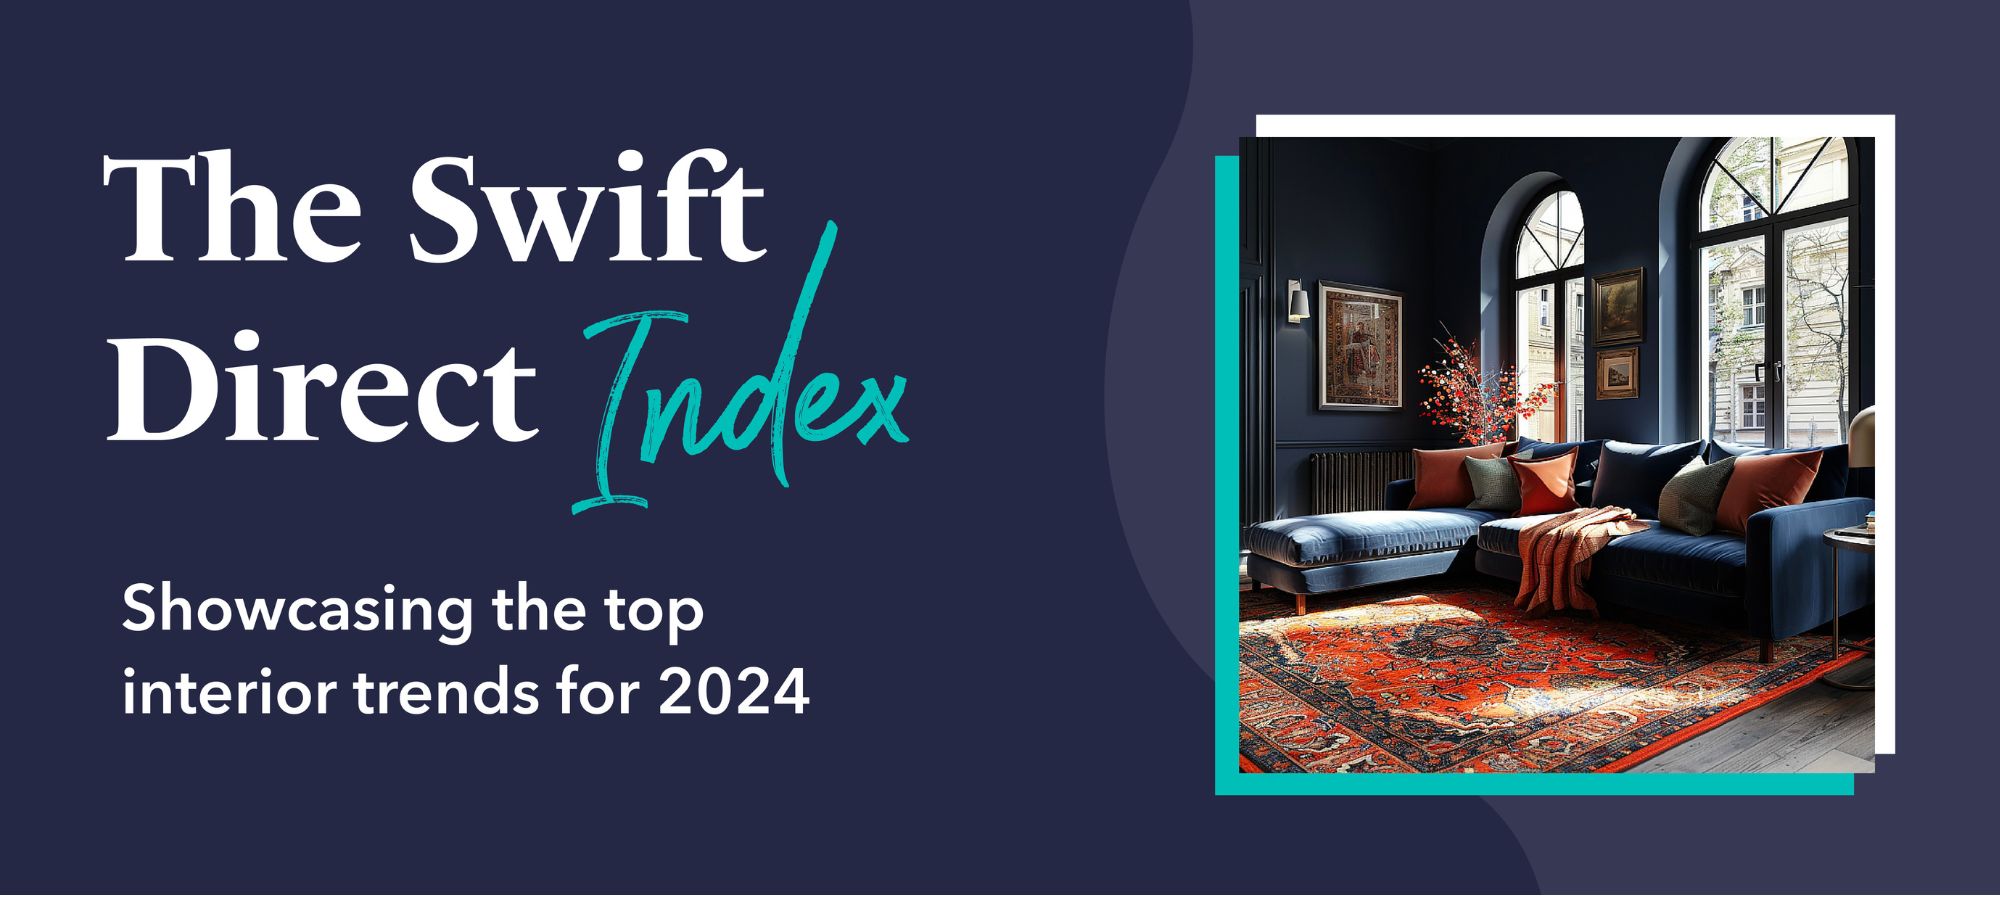 The Swift Direct Index